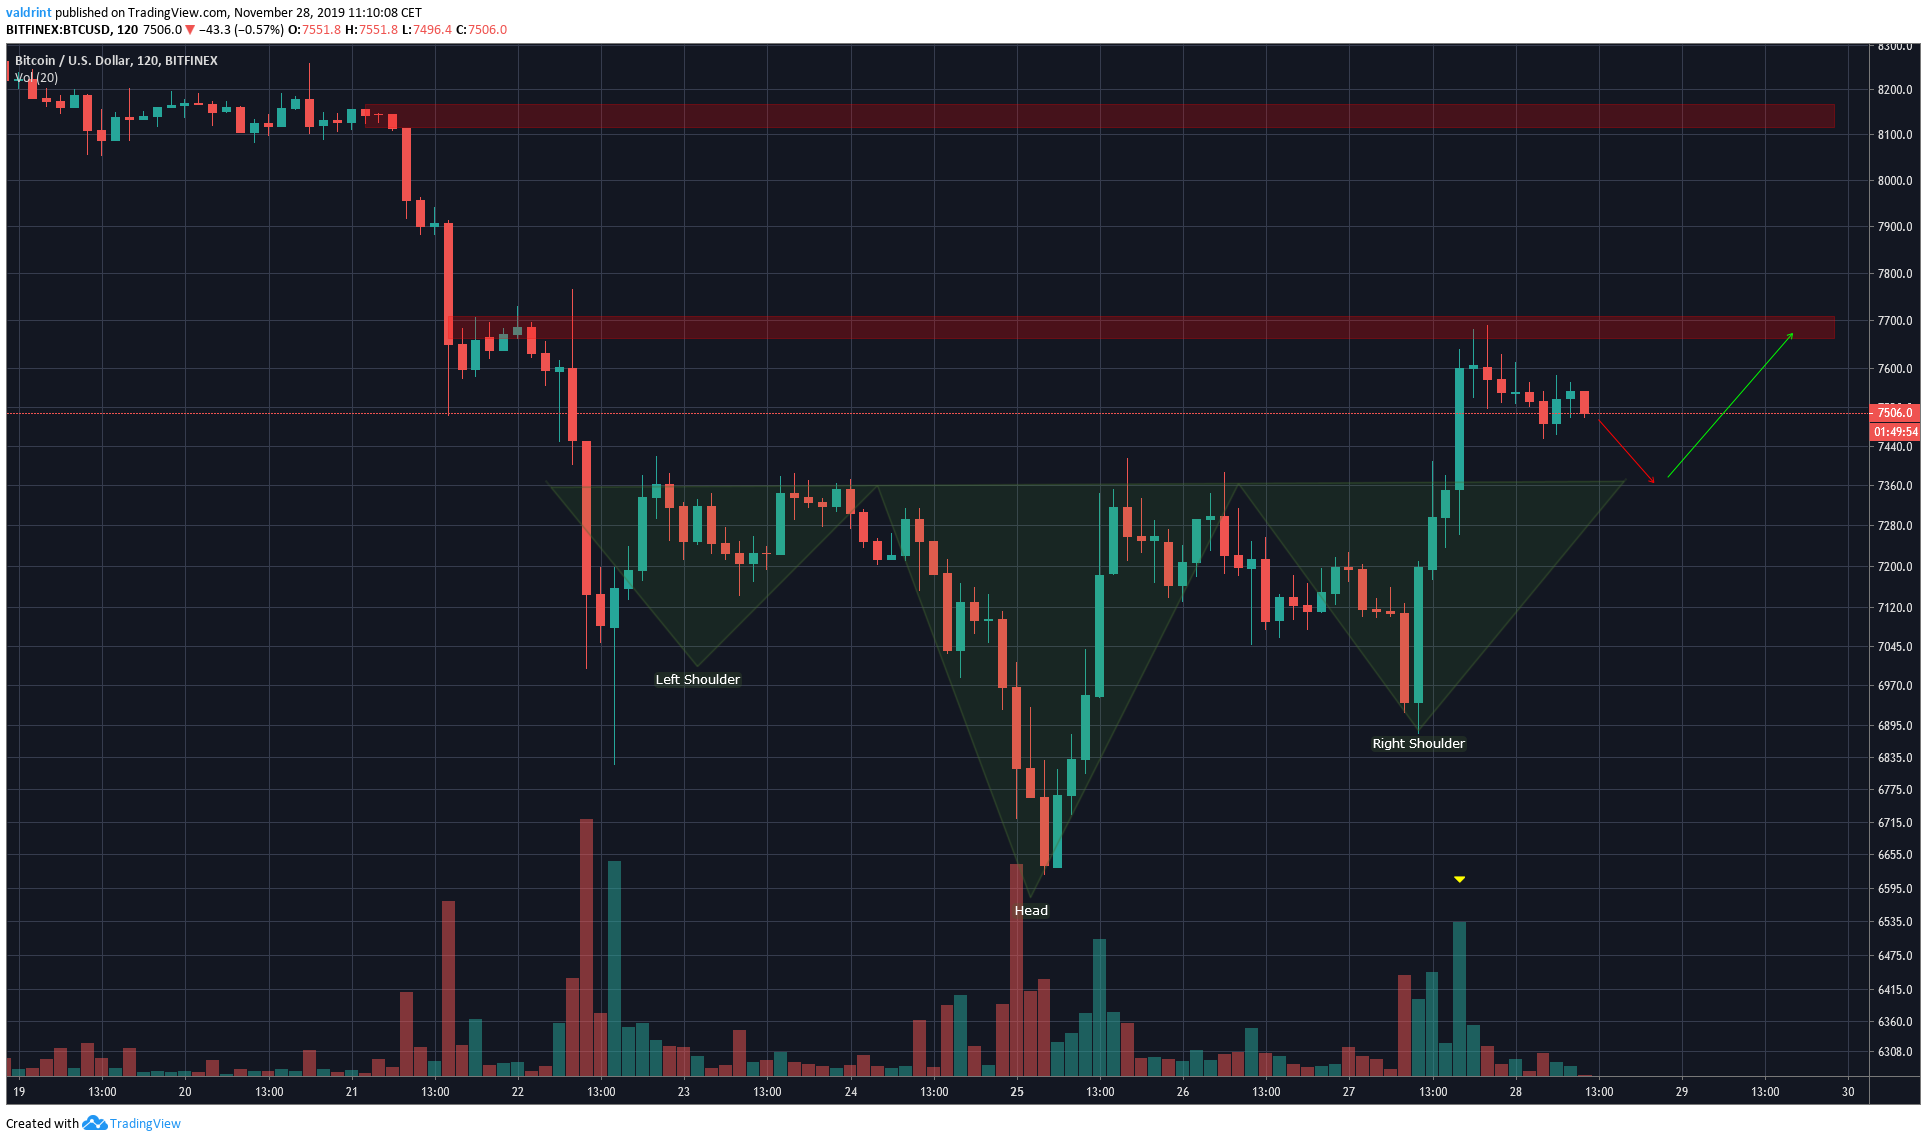 BTC Inverse Head and Shoulders